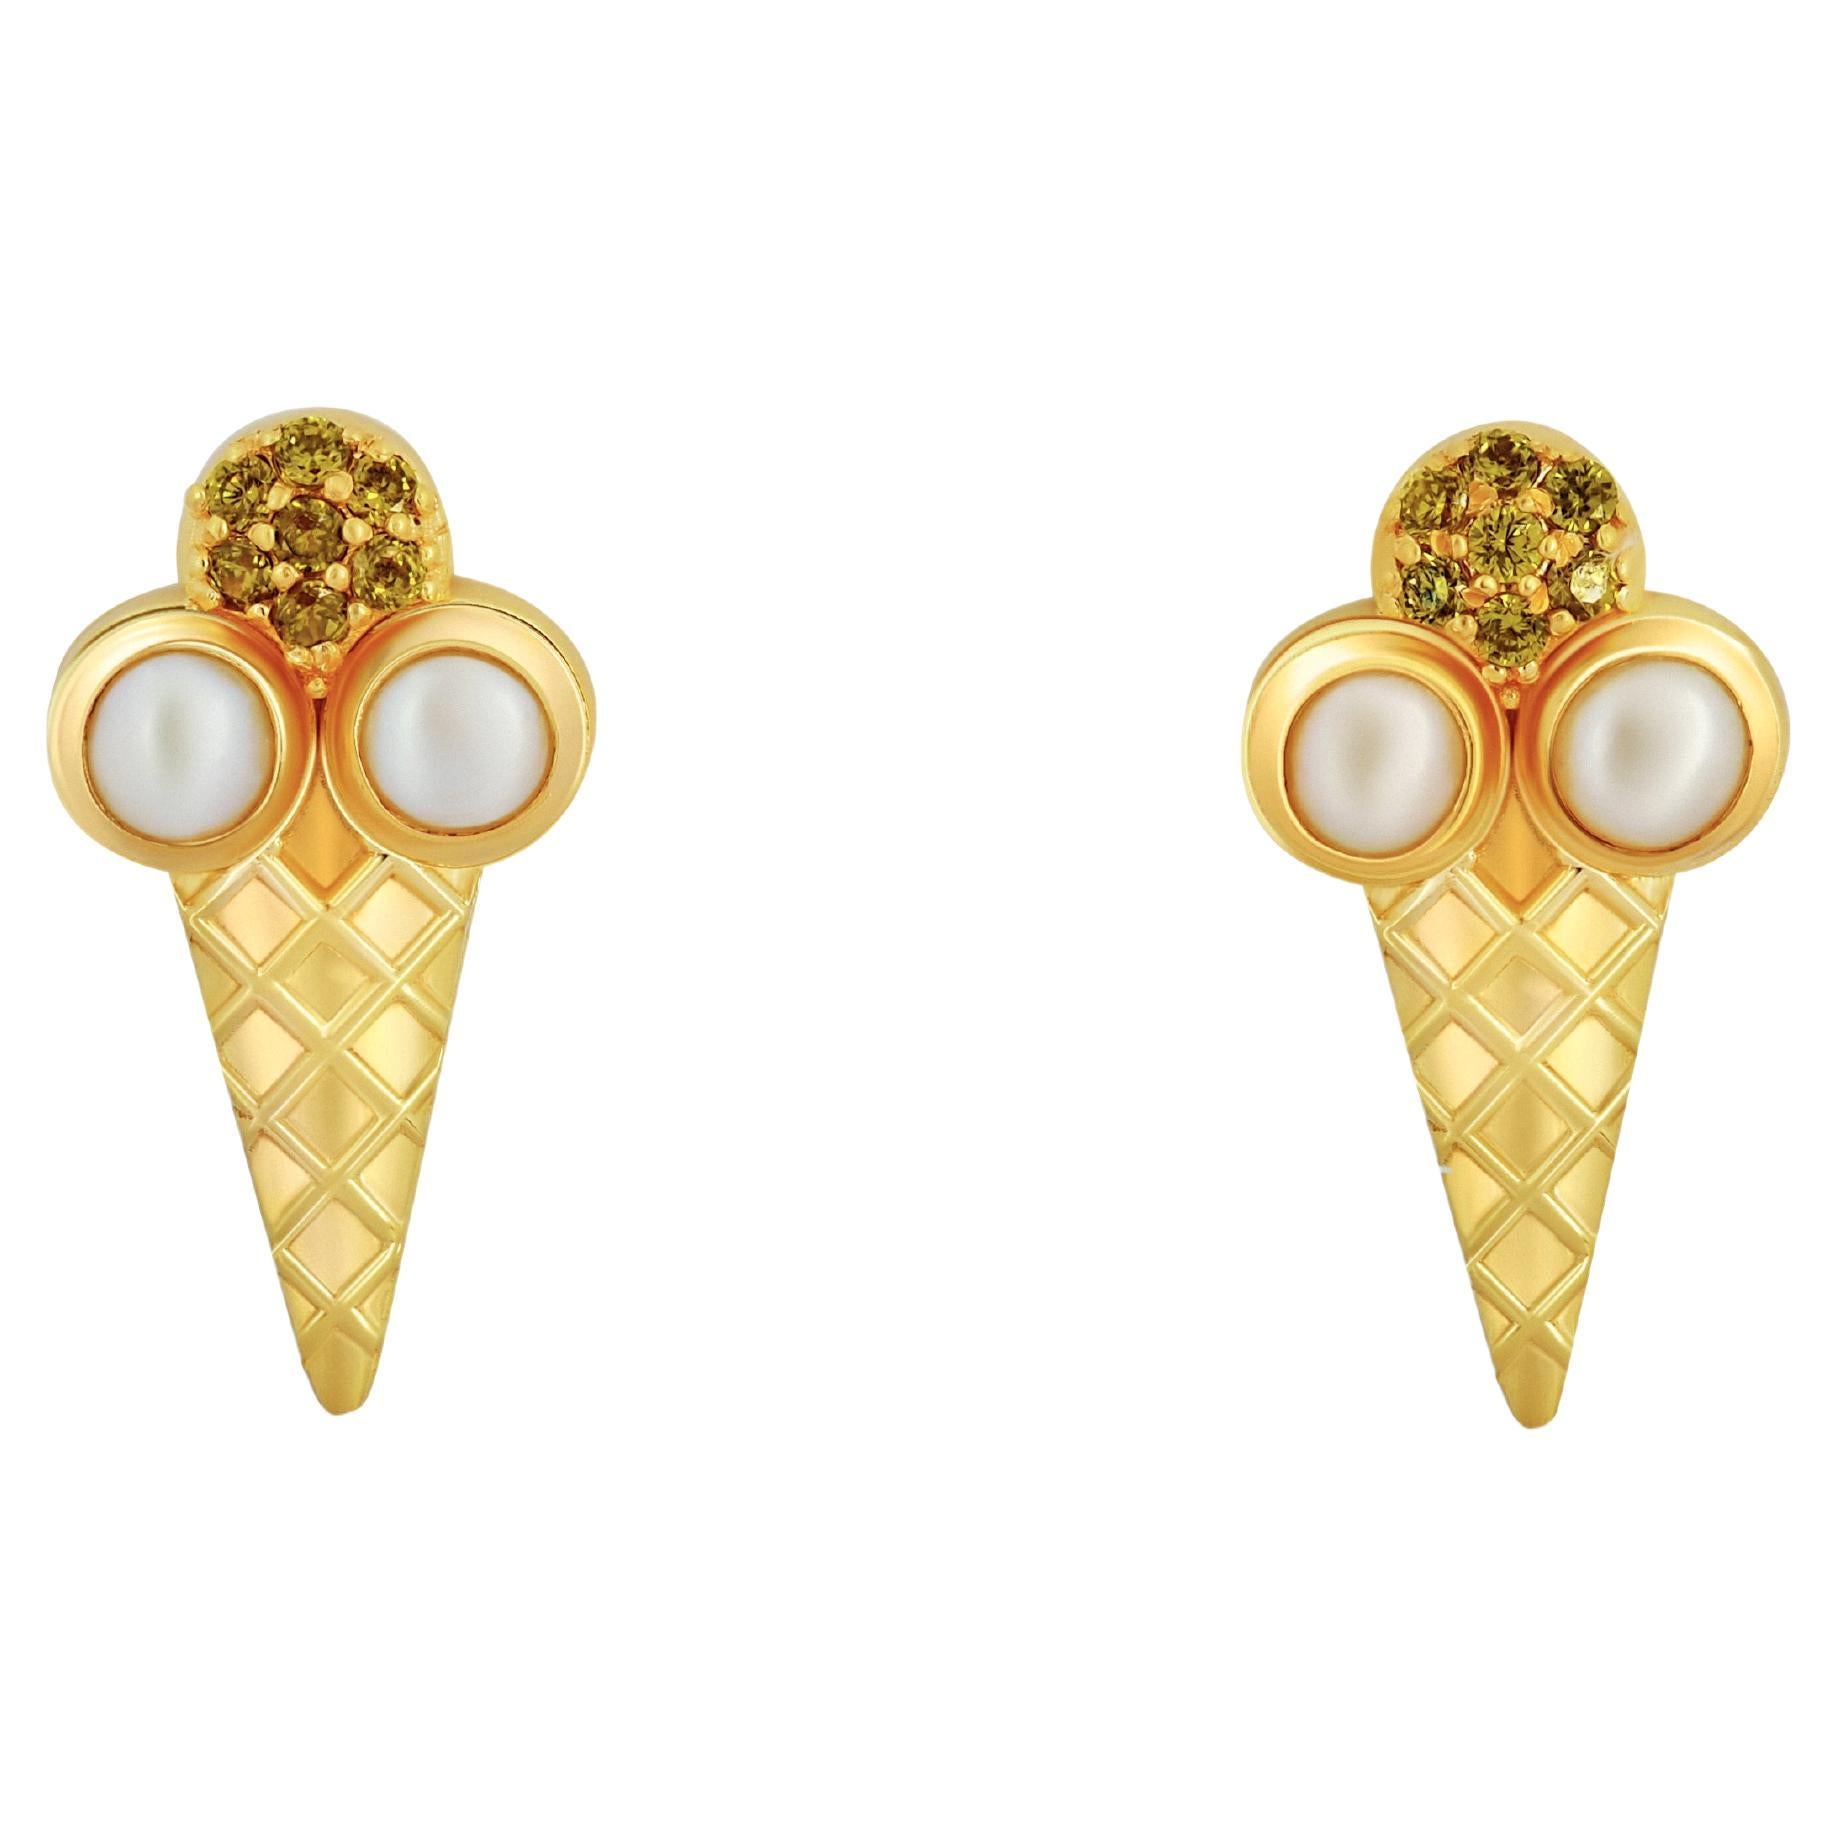 Ice cream funny earrings studs with peridots and pearls in 14k gold For Sale